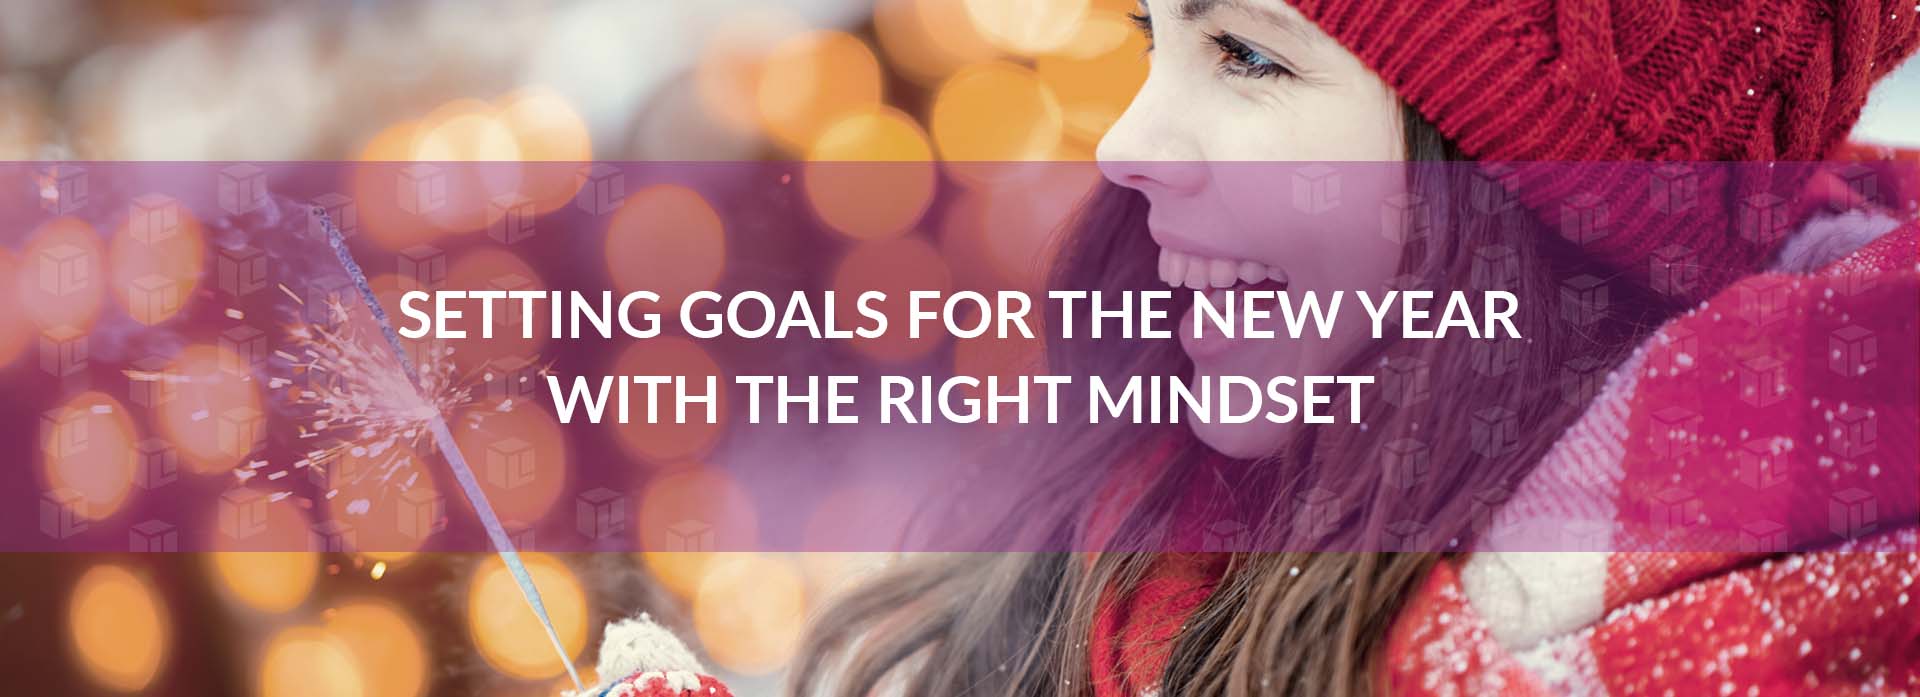 Setting Goals For The New Year With The Right Mindset